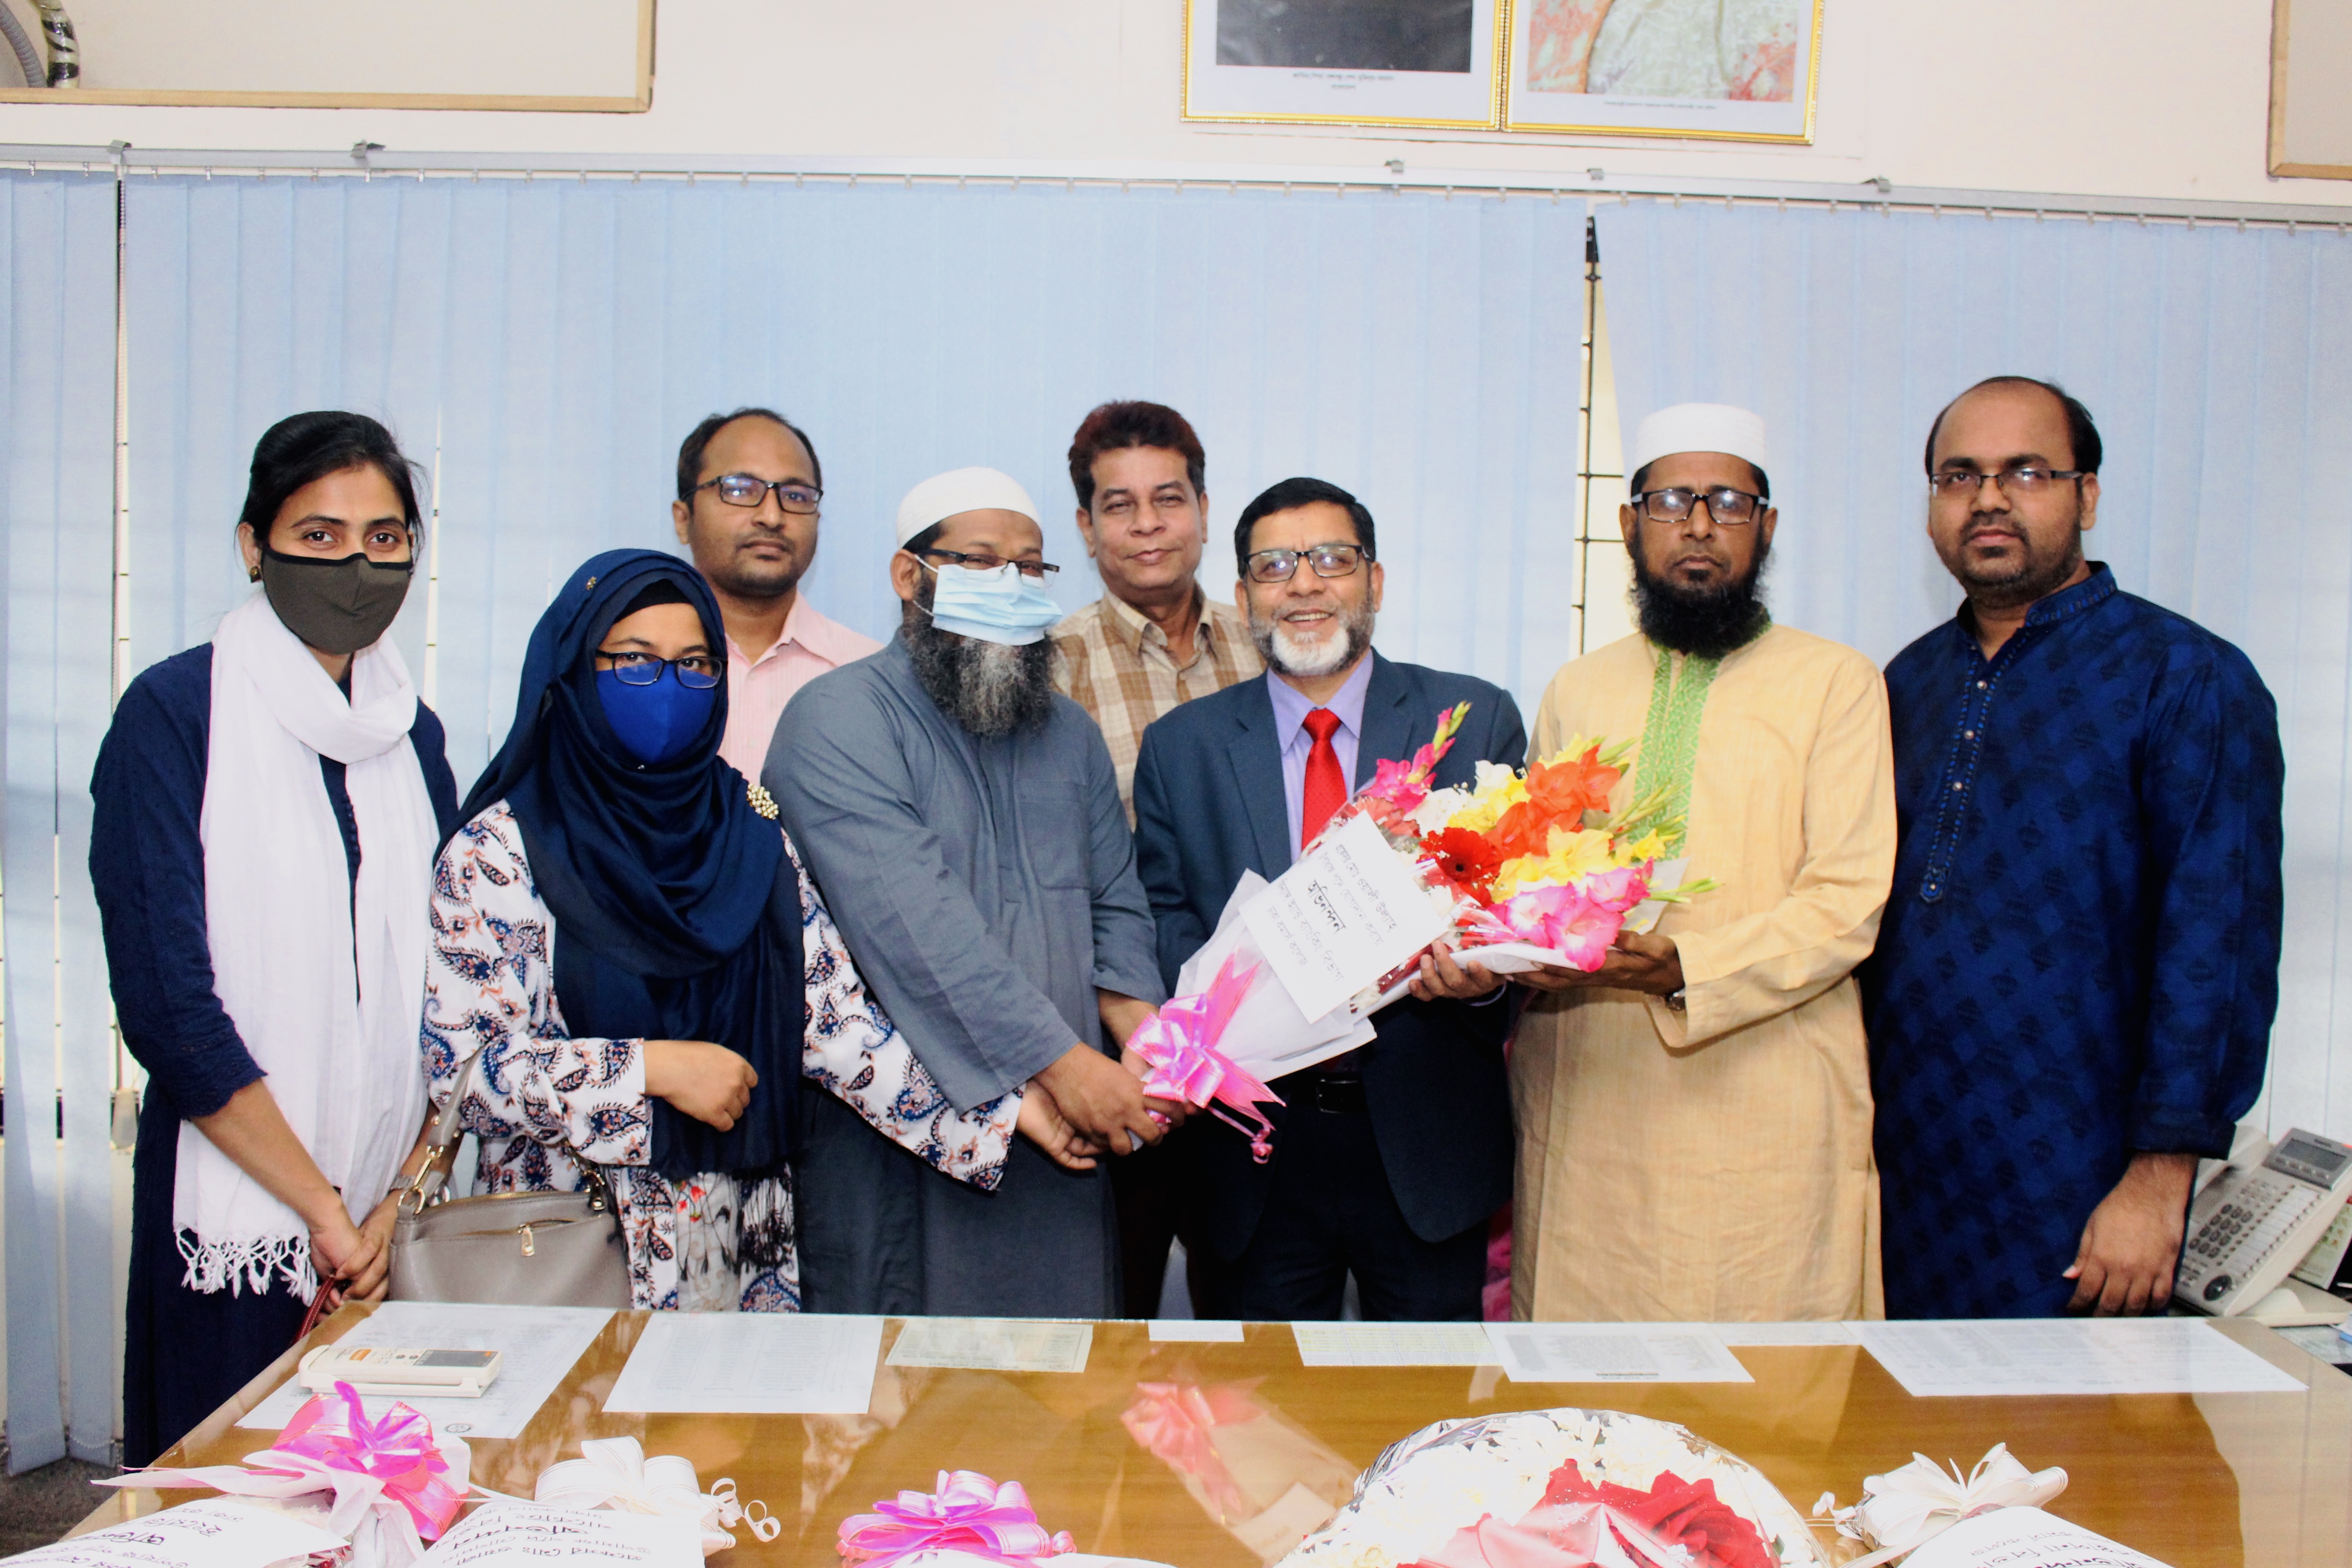 Reception to Vice Principal Prof. Md. Wali Ullah by Finance & Banking Department